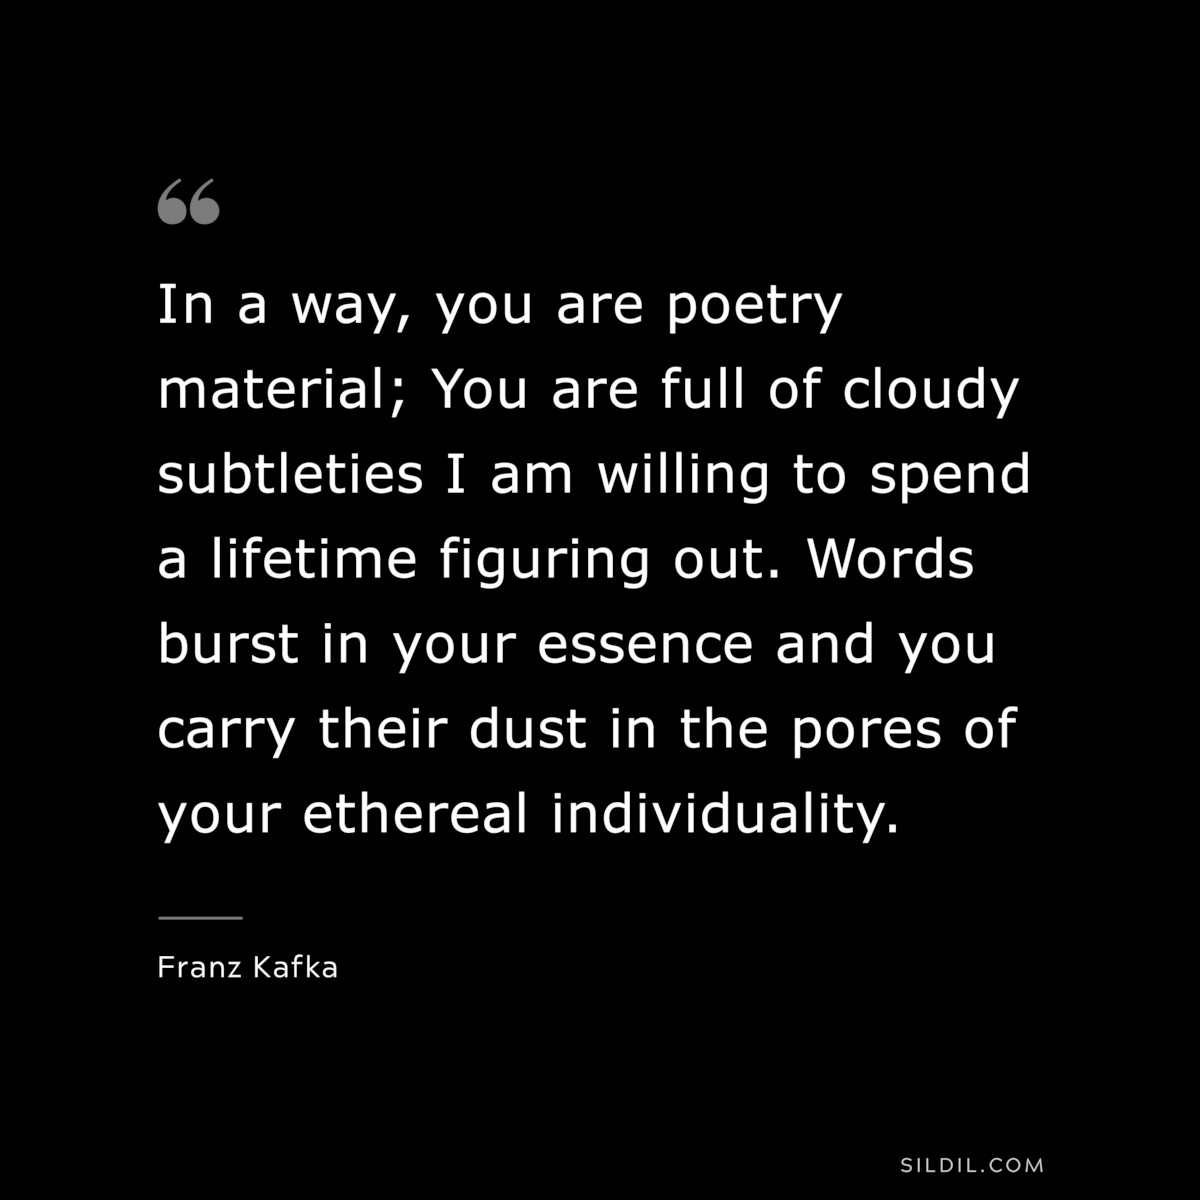 In a way, you are poetry material; You are full of cloudy subtleties I am willing to spend a lifetime figuring out. Words burst in your essence and you carry their dust in the pores of your ethereal individuality. ― Franz Kafka